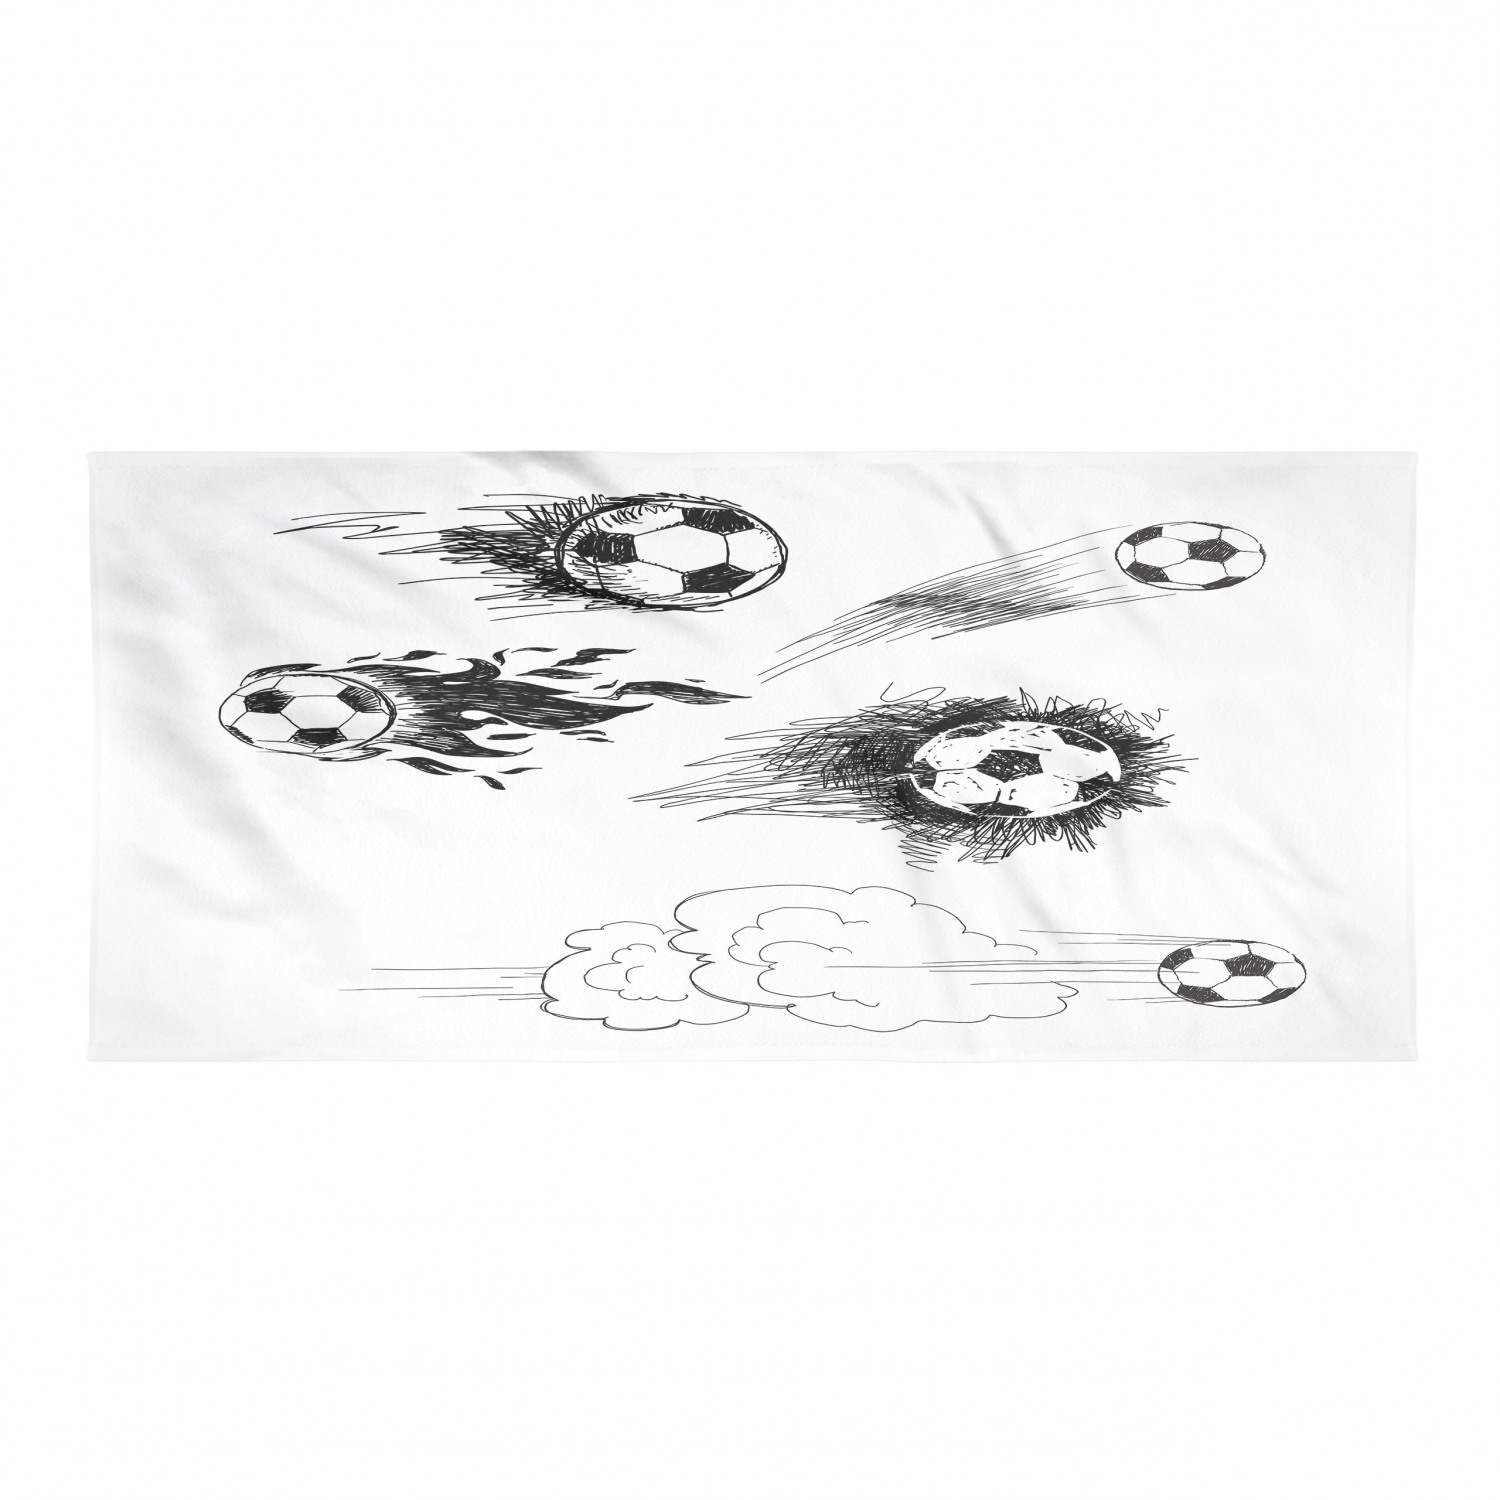 Soccer Sports Towel, Various Round Soccer Balls in Air Fast Kick Shoot in Kickoff Space Art Sketch, Soft Absorbent Ultra Compact Microfiber for Beach Yoga Gym, White and Black, by Ambesonne - image 1 of 2